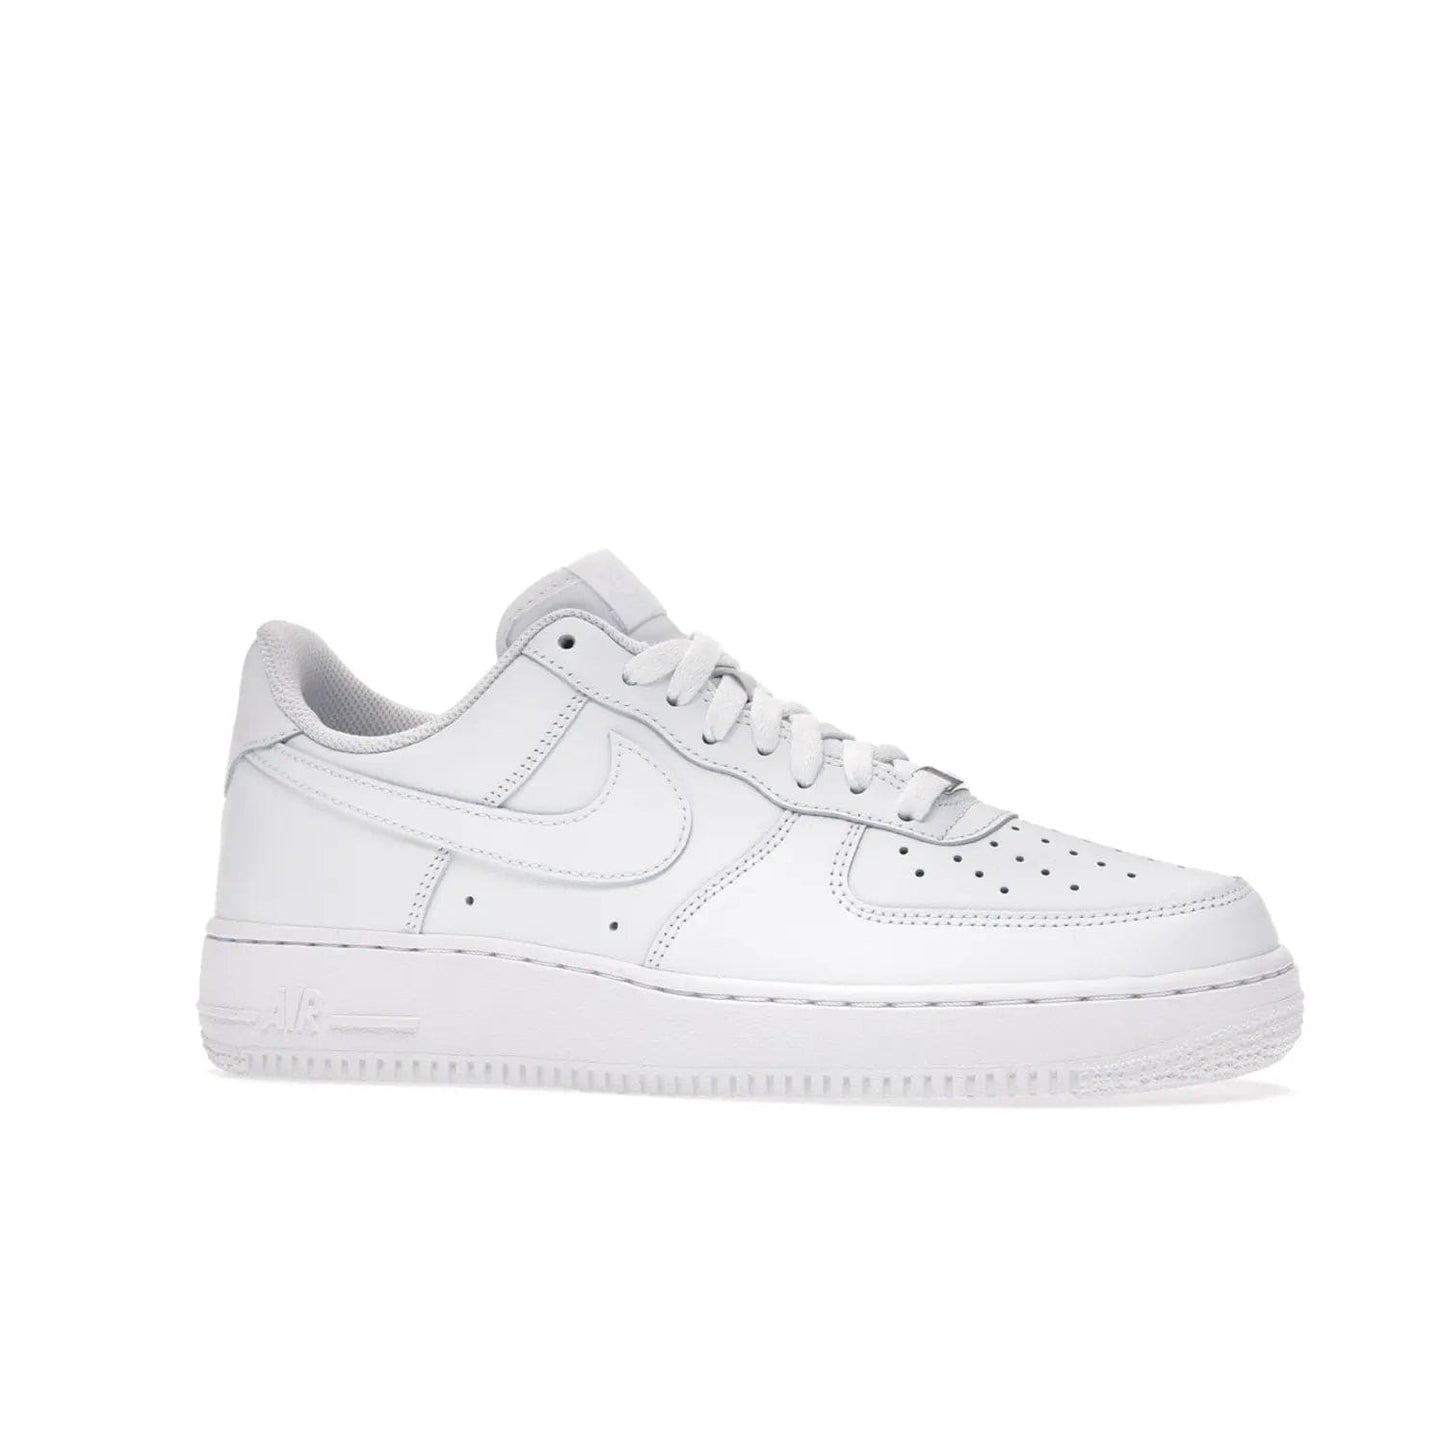 Nike Air Force 1 Low '07 White - Image 3 - Only at www.BallersClubKickz.com - ##
Iconic Swoosh overlays and crisp white sole make the classic Nike Air Force 1 Low White '07 an essential colorway. Classic for seasoned heads and new fans alike.